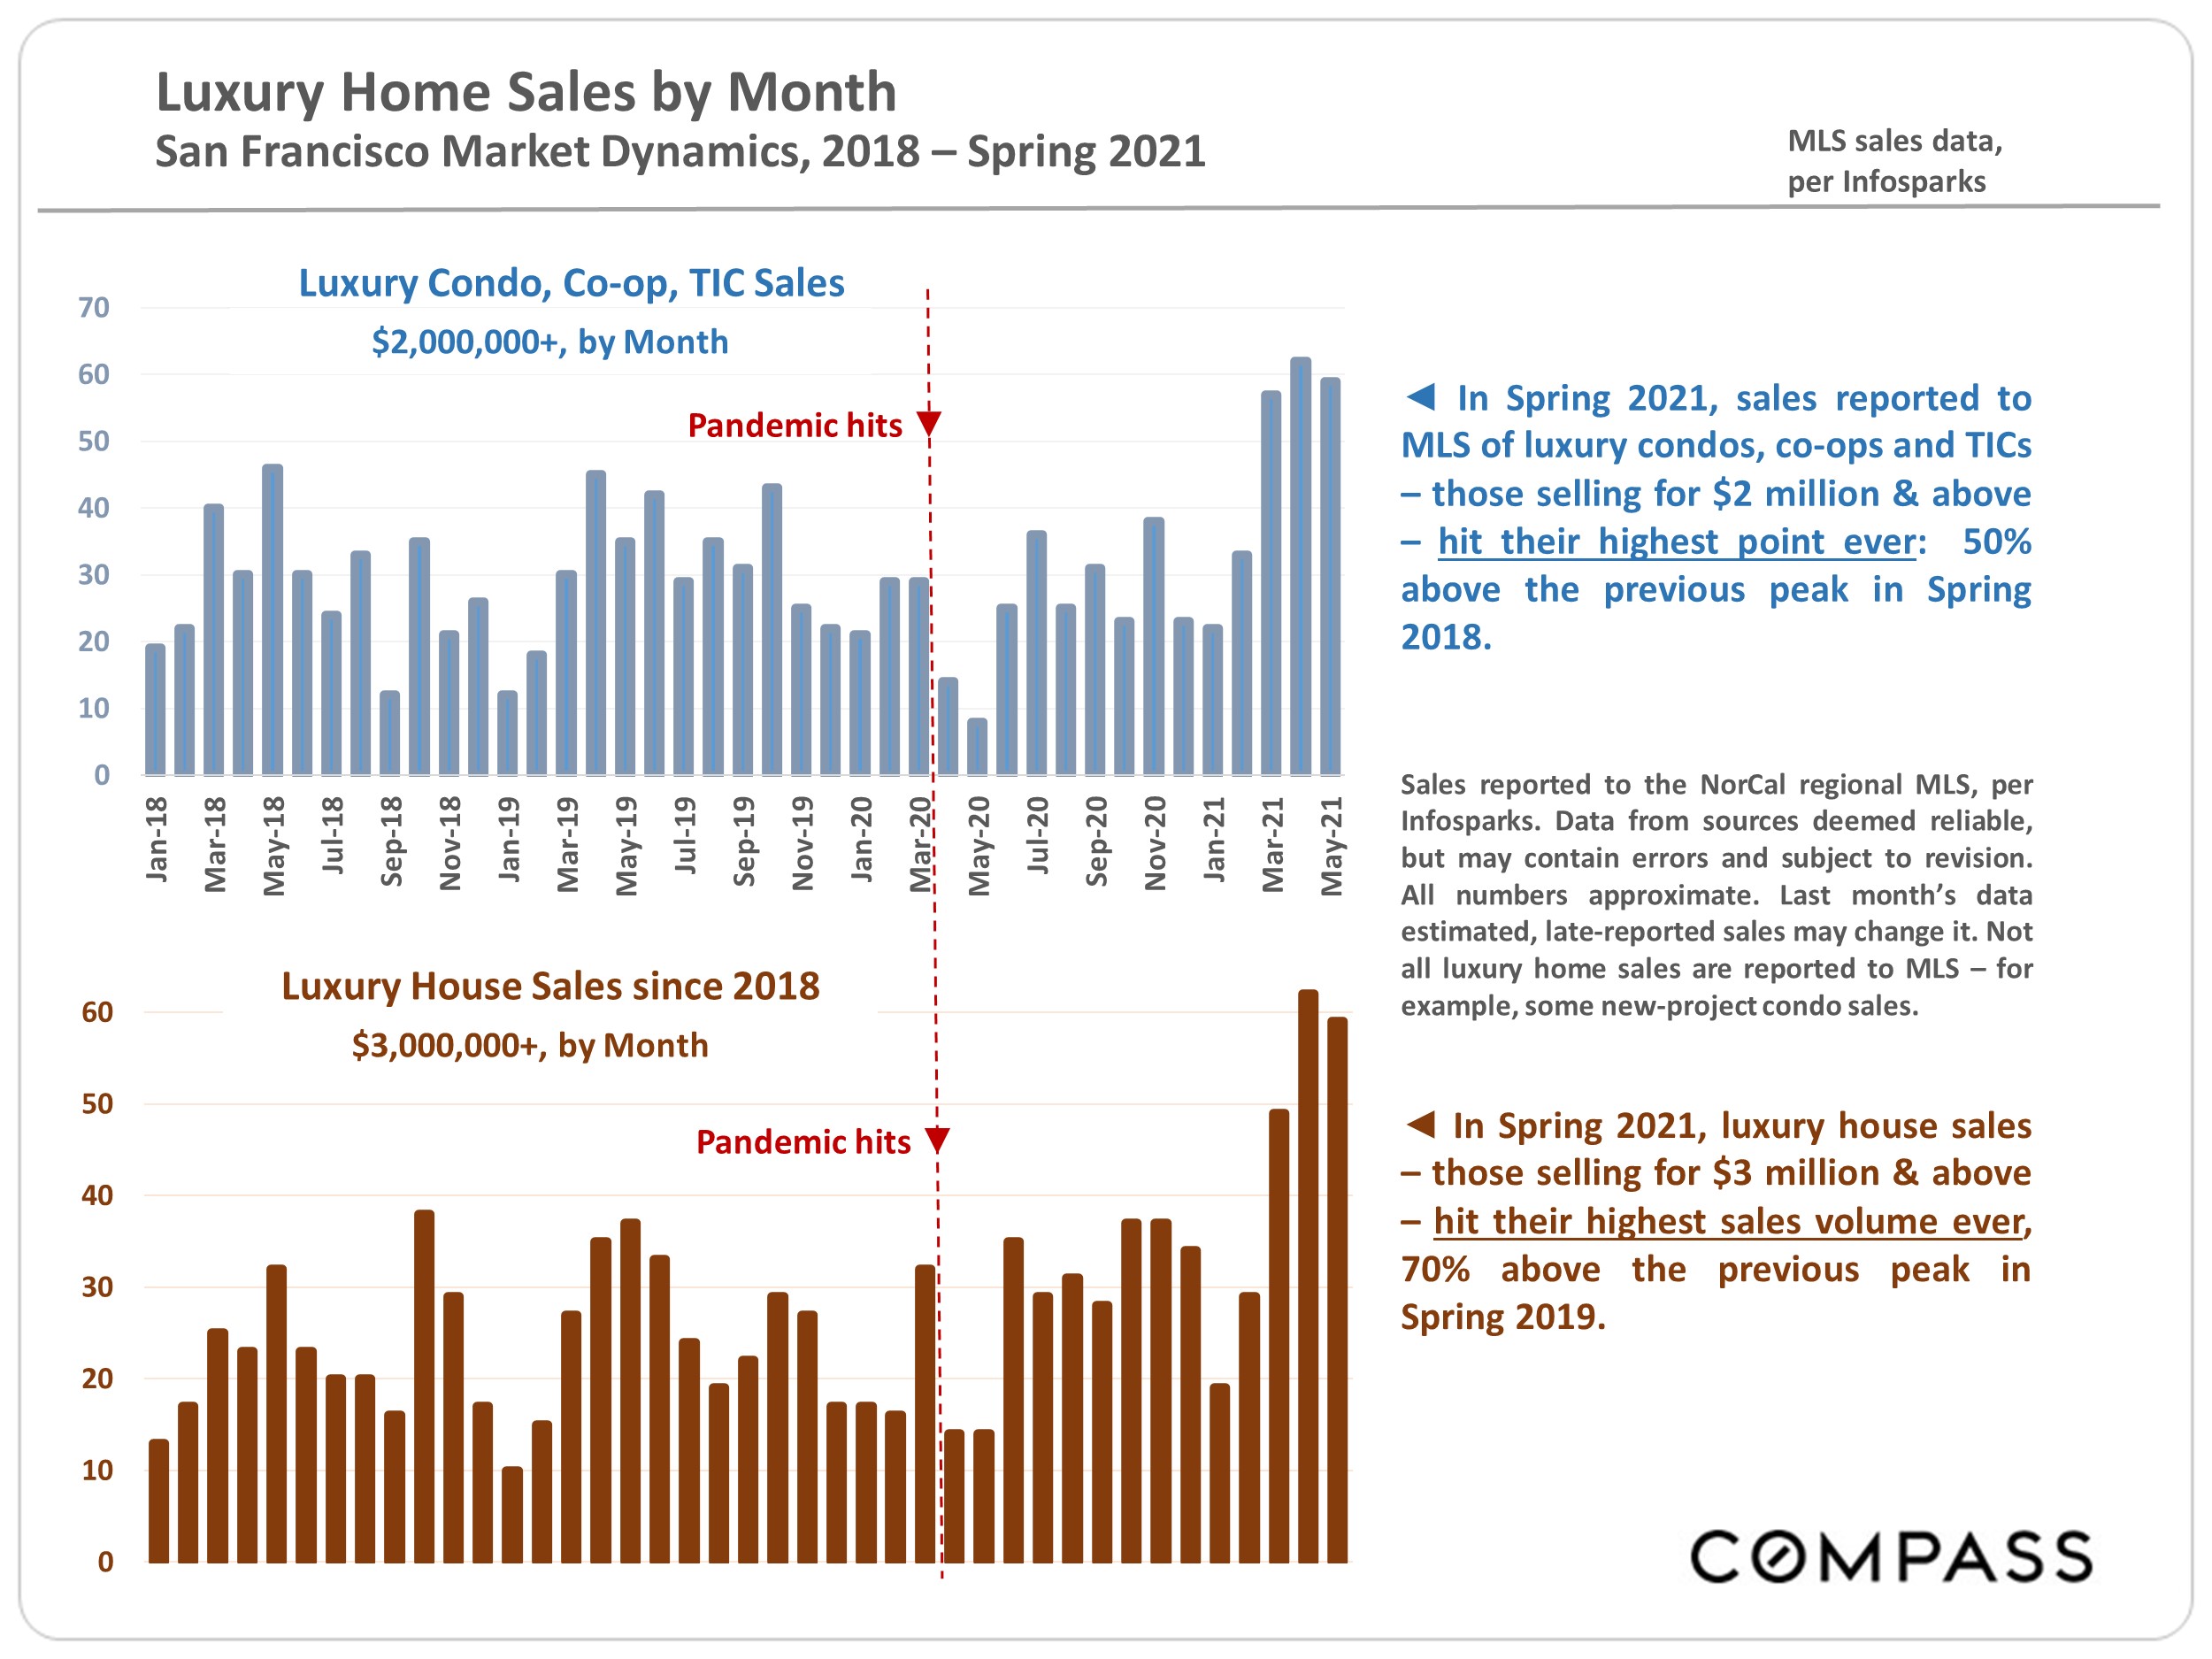 Chart showing the luxury home sales by month, San Francisco Market Dynamics, from 2018 to spring 2021, for luxury condo, co-op, TIC and house